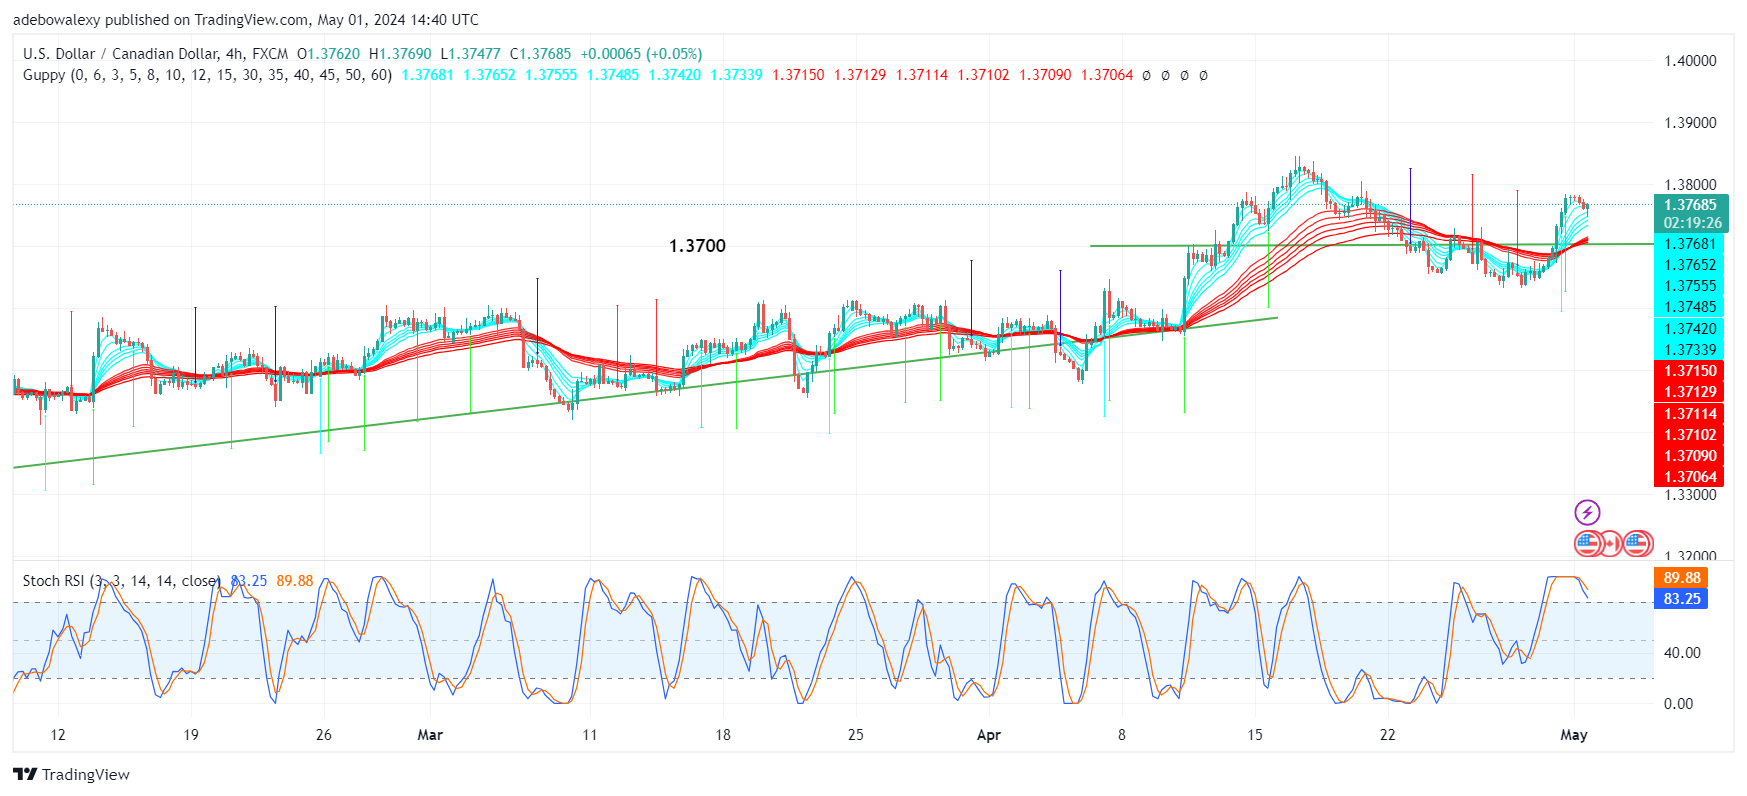 USDCAD Continues to Trade Above the 1.3750 Level